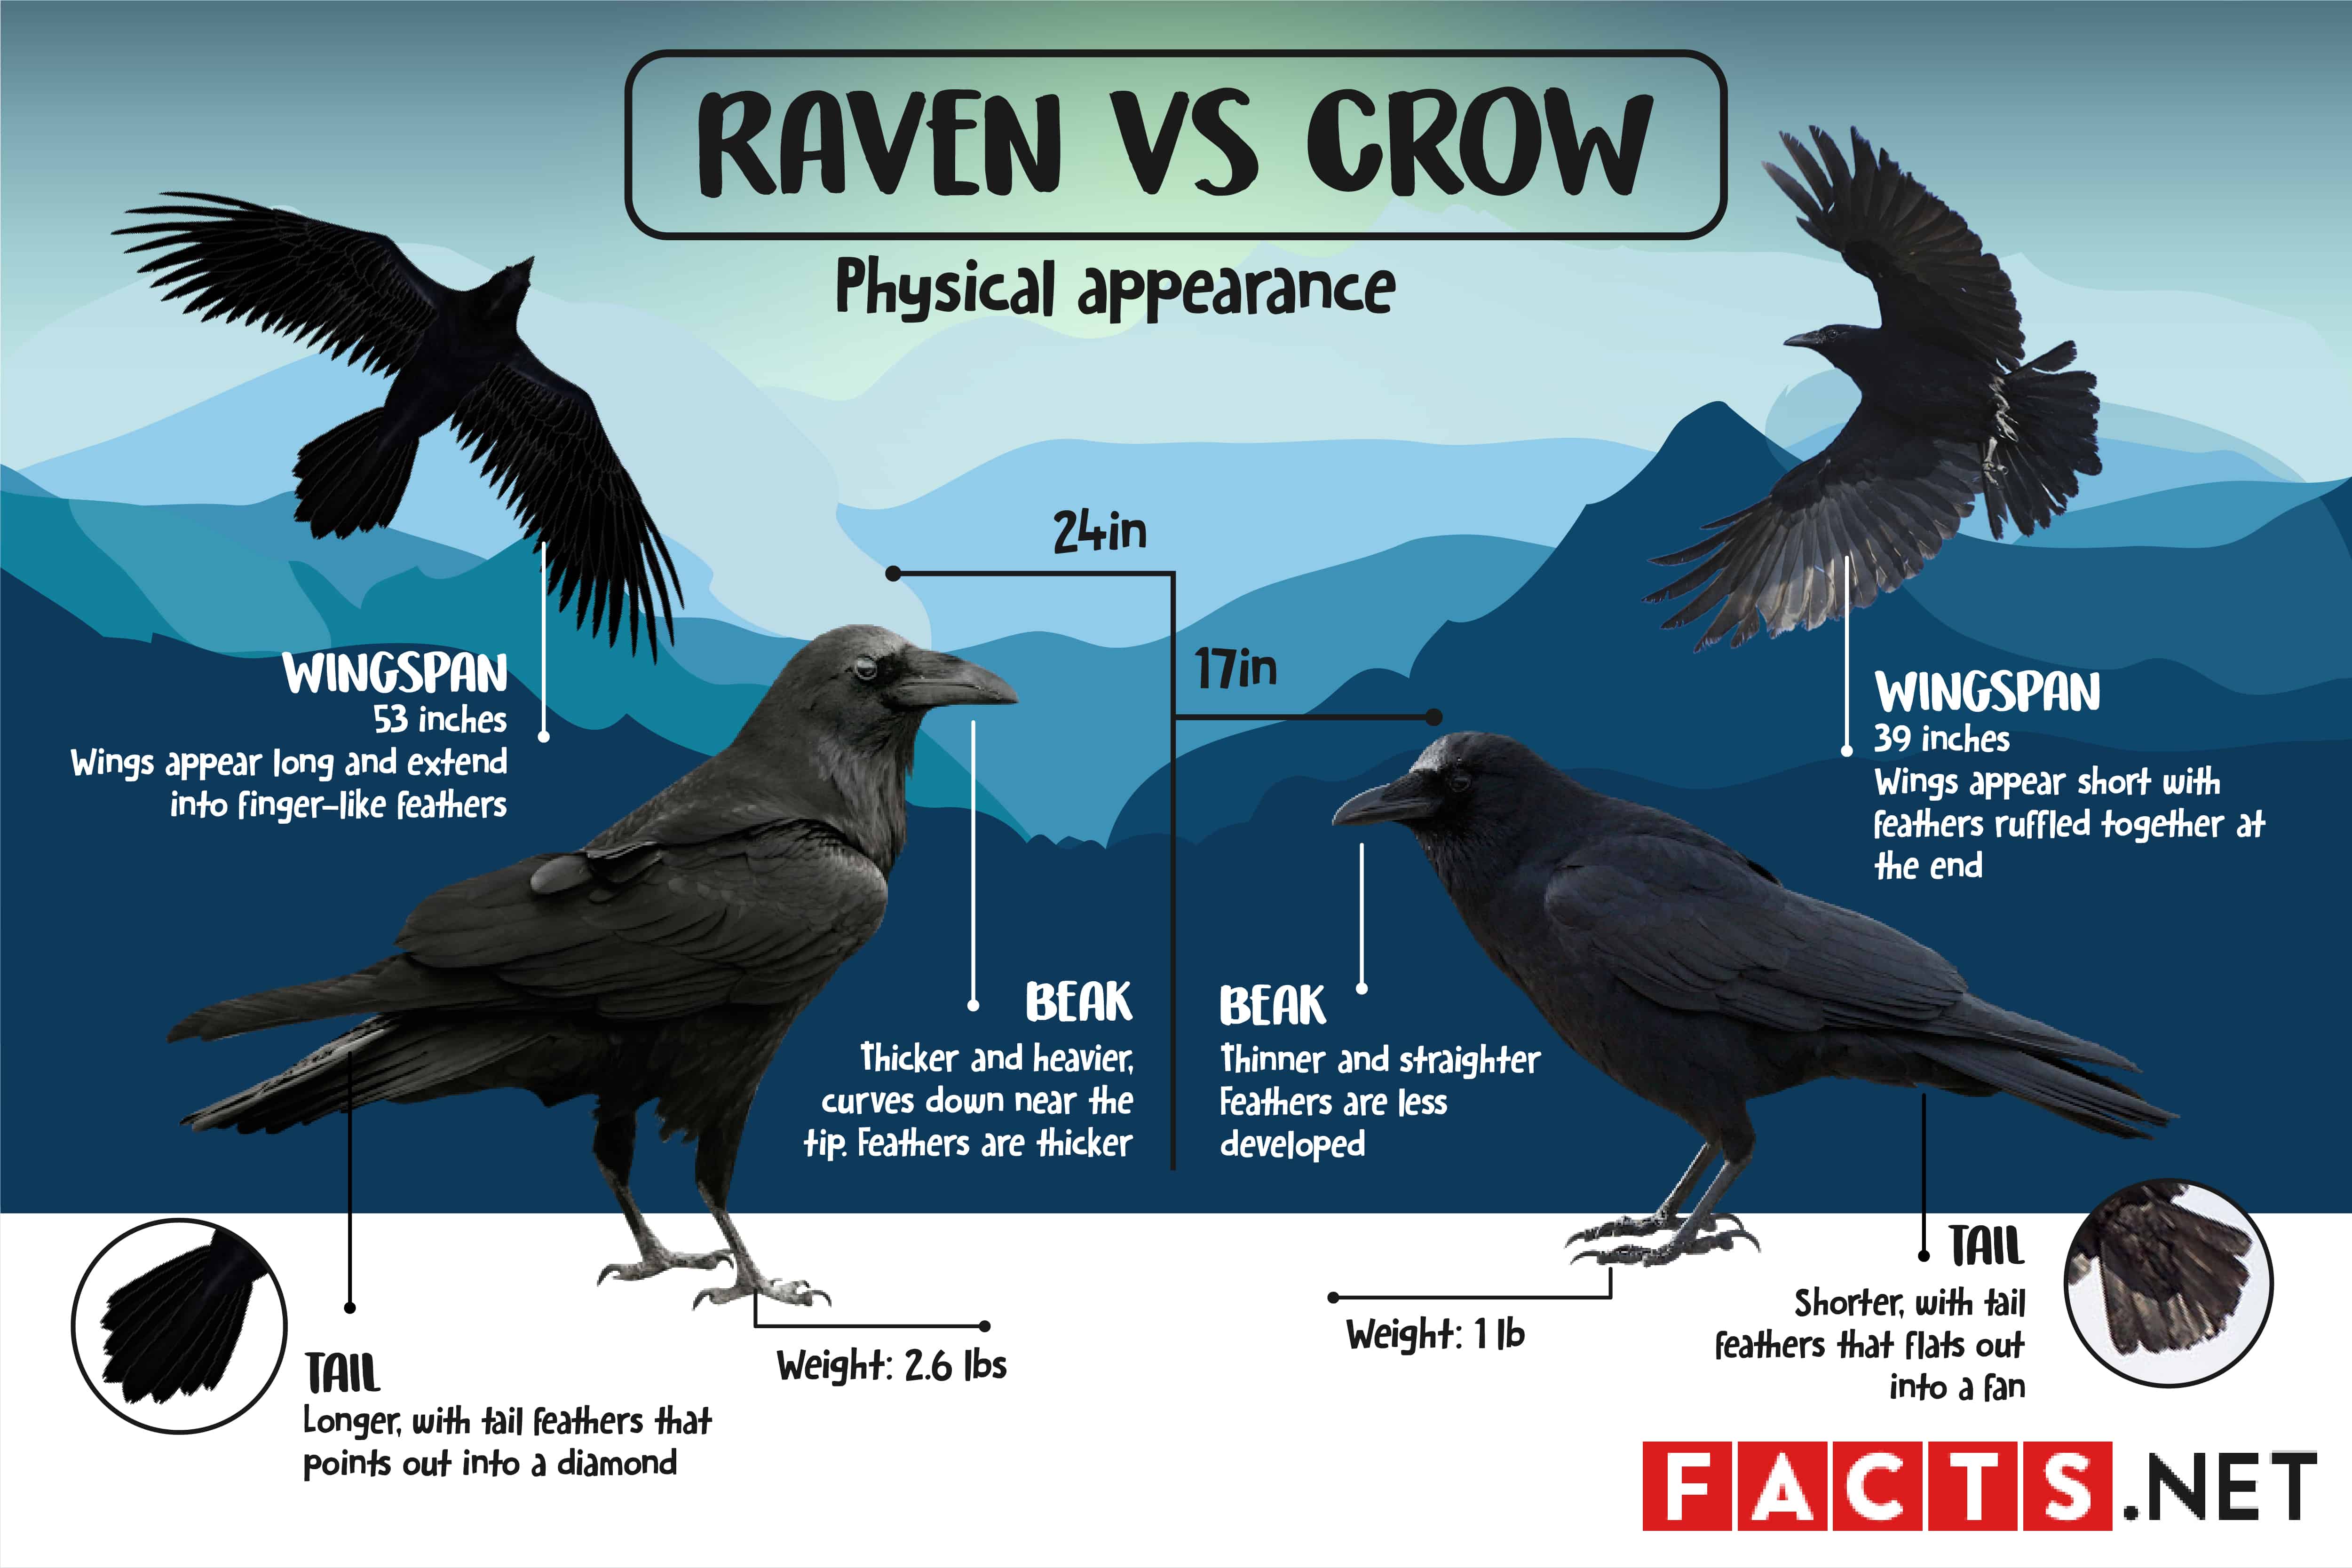 Raven vs Crow, Physical appearance